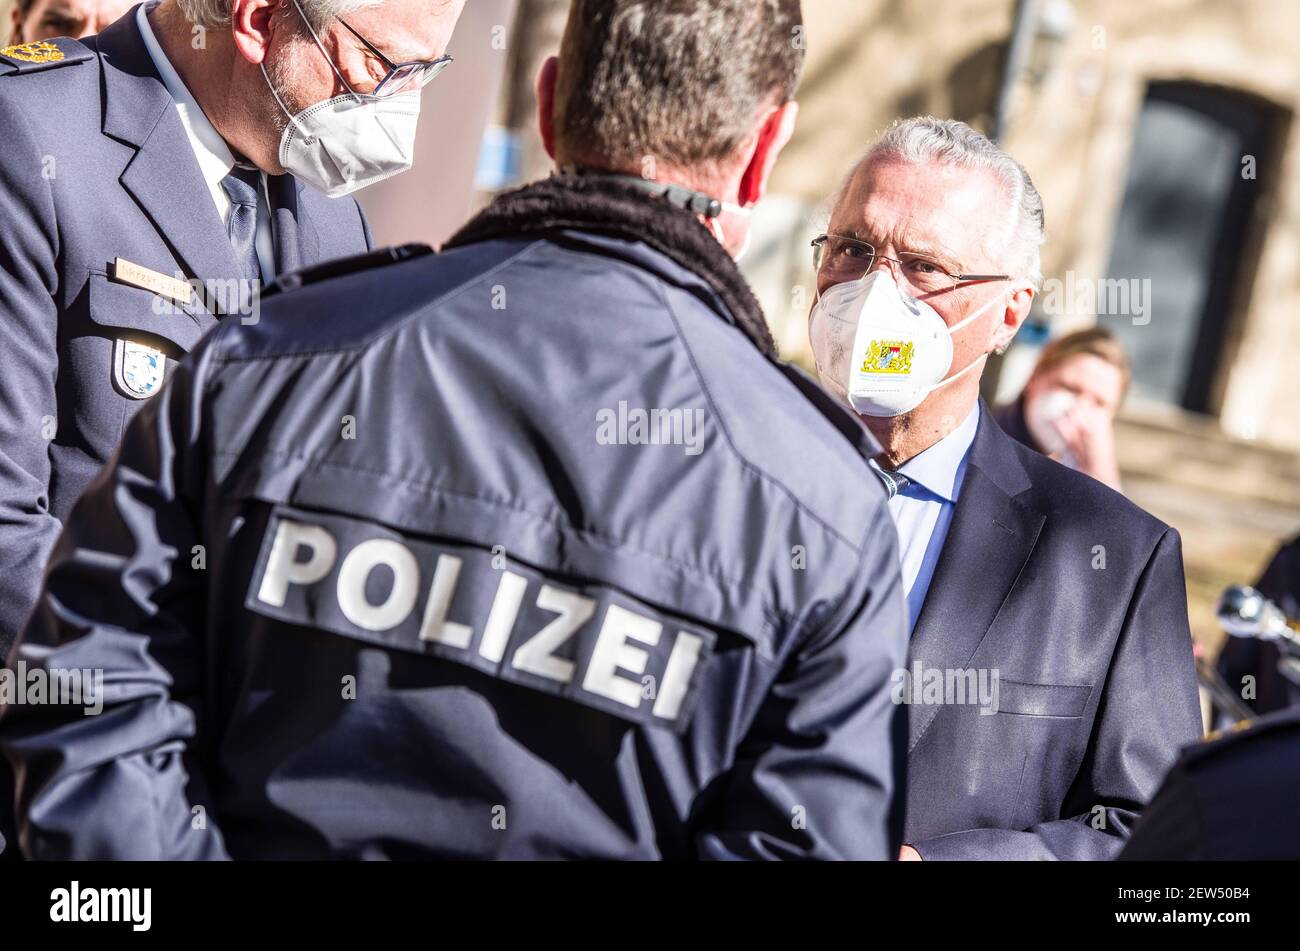 Munich, Bavaria, Germany. 2nd Mar, 2021. JOACHIM HERRMANN, Interior Minister of Bavaria meeting with police officers to kick off the Covid vaccination program. Starting with some 10,000 doses of the AstraZeneca Covid-19 vaccine, the Bavarian Police has begun vaccinating its Bereitschaftspolizei and Einsatzeinheiten- specialized police units that deal with demonstrations, riots, and other missions. Germany's vaccine program has been criticized for being extremely slow, with numerous nations surpassing not only percentage of the population vaccinated, but also absolute numbers as they vaccin Stock Photo